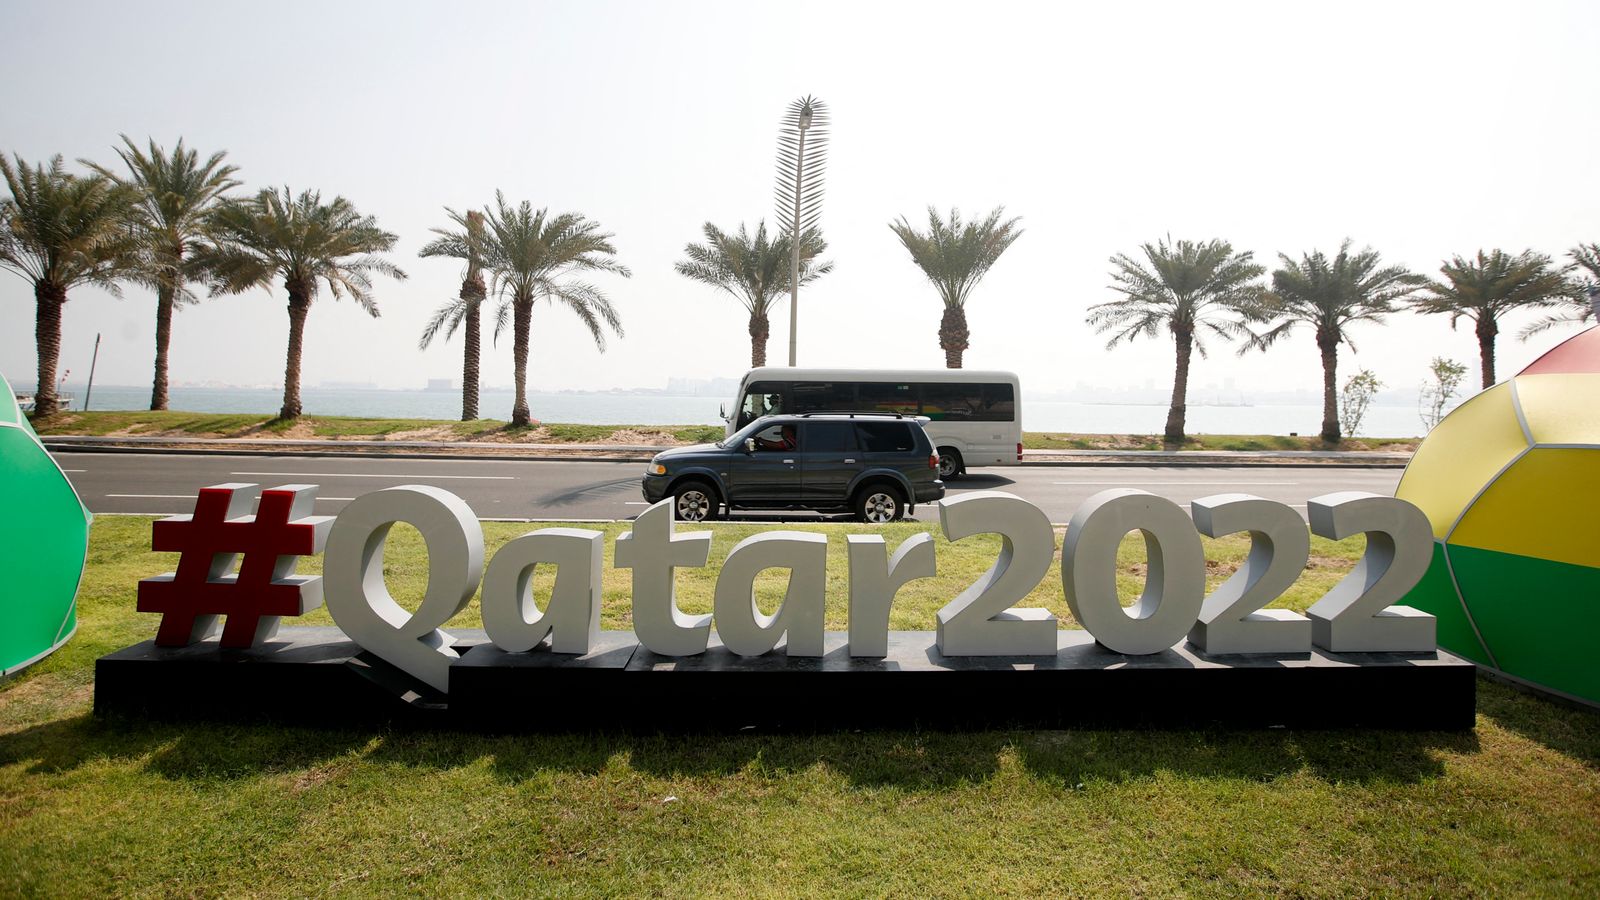 Wales fan dies in Qatar after travelling to World Cup